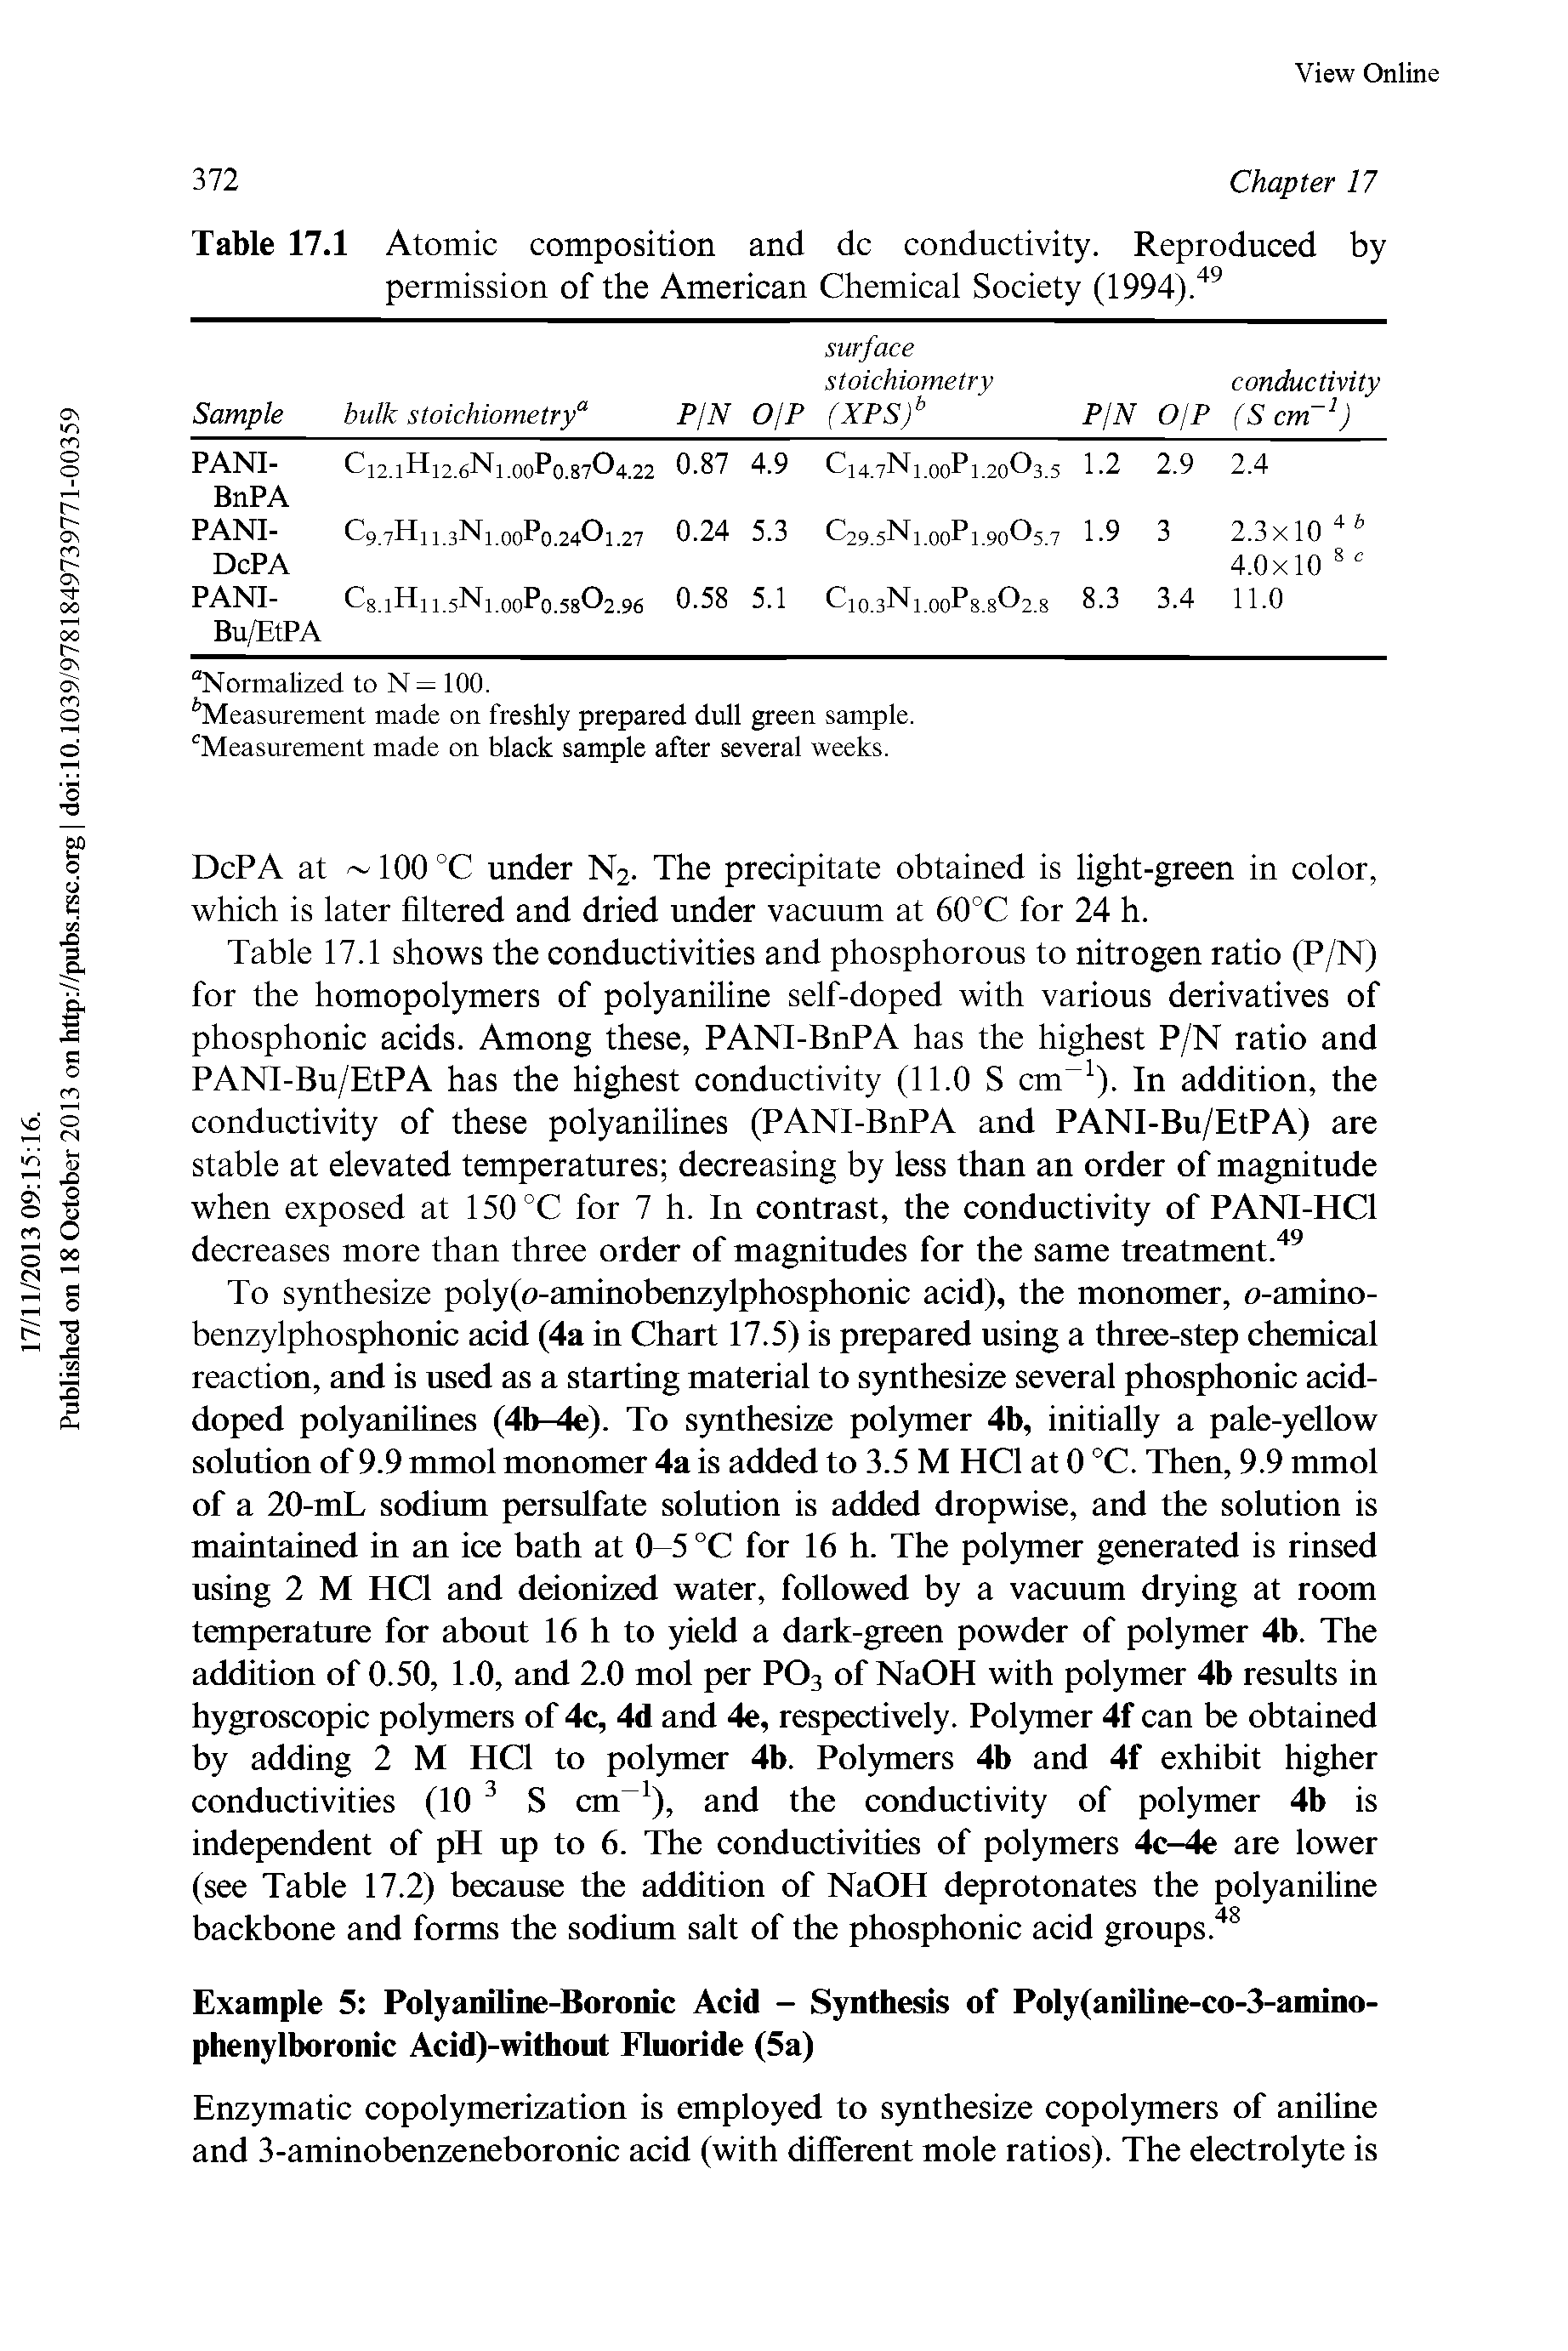 Table 17.1 Atomic composition and dc conductivity. Reproduced by permission of the American Chemical Society (1994)." ...